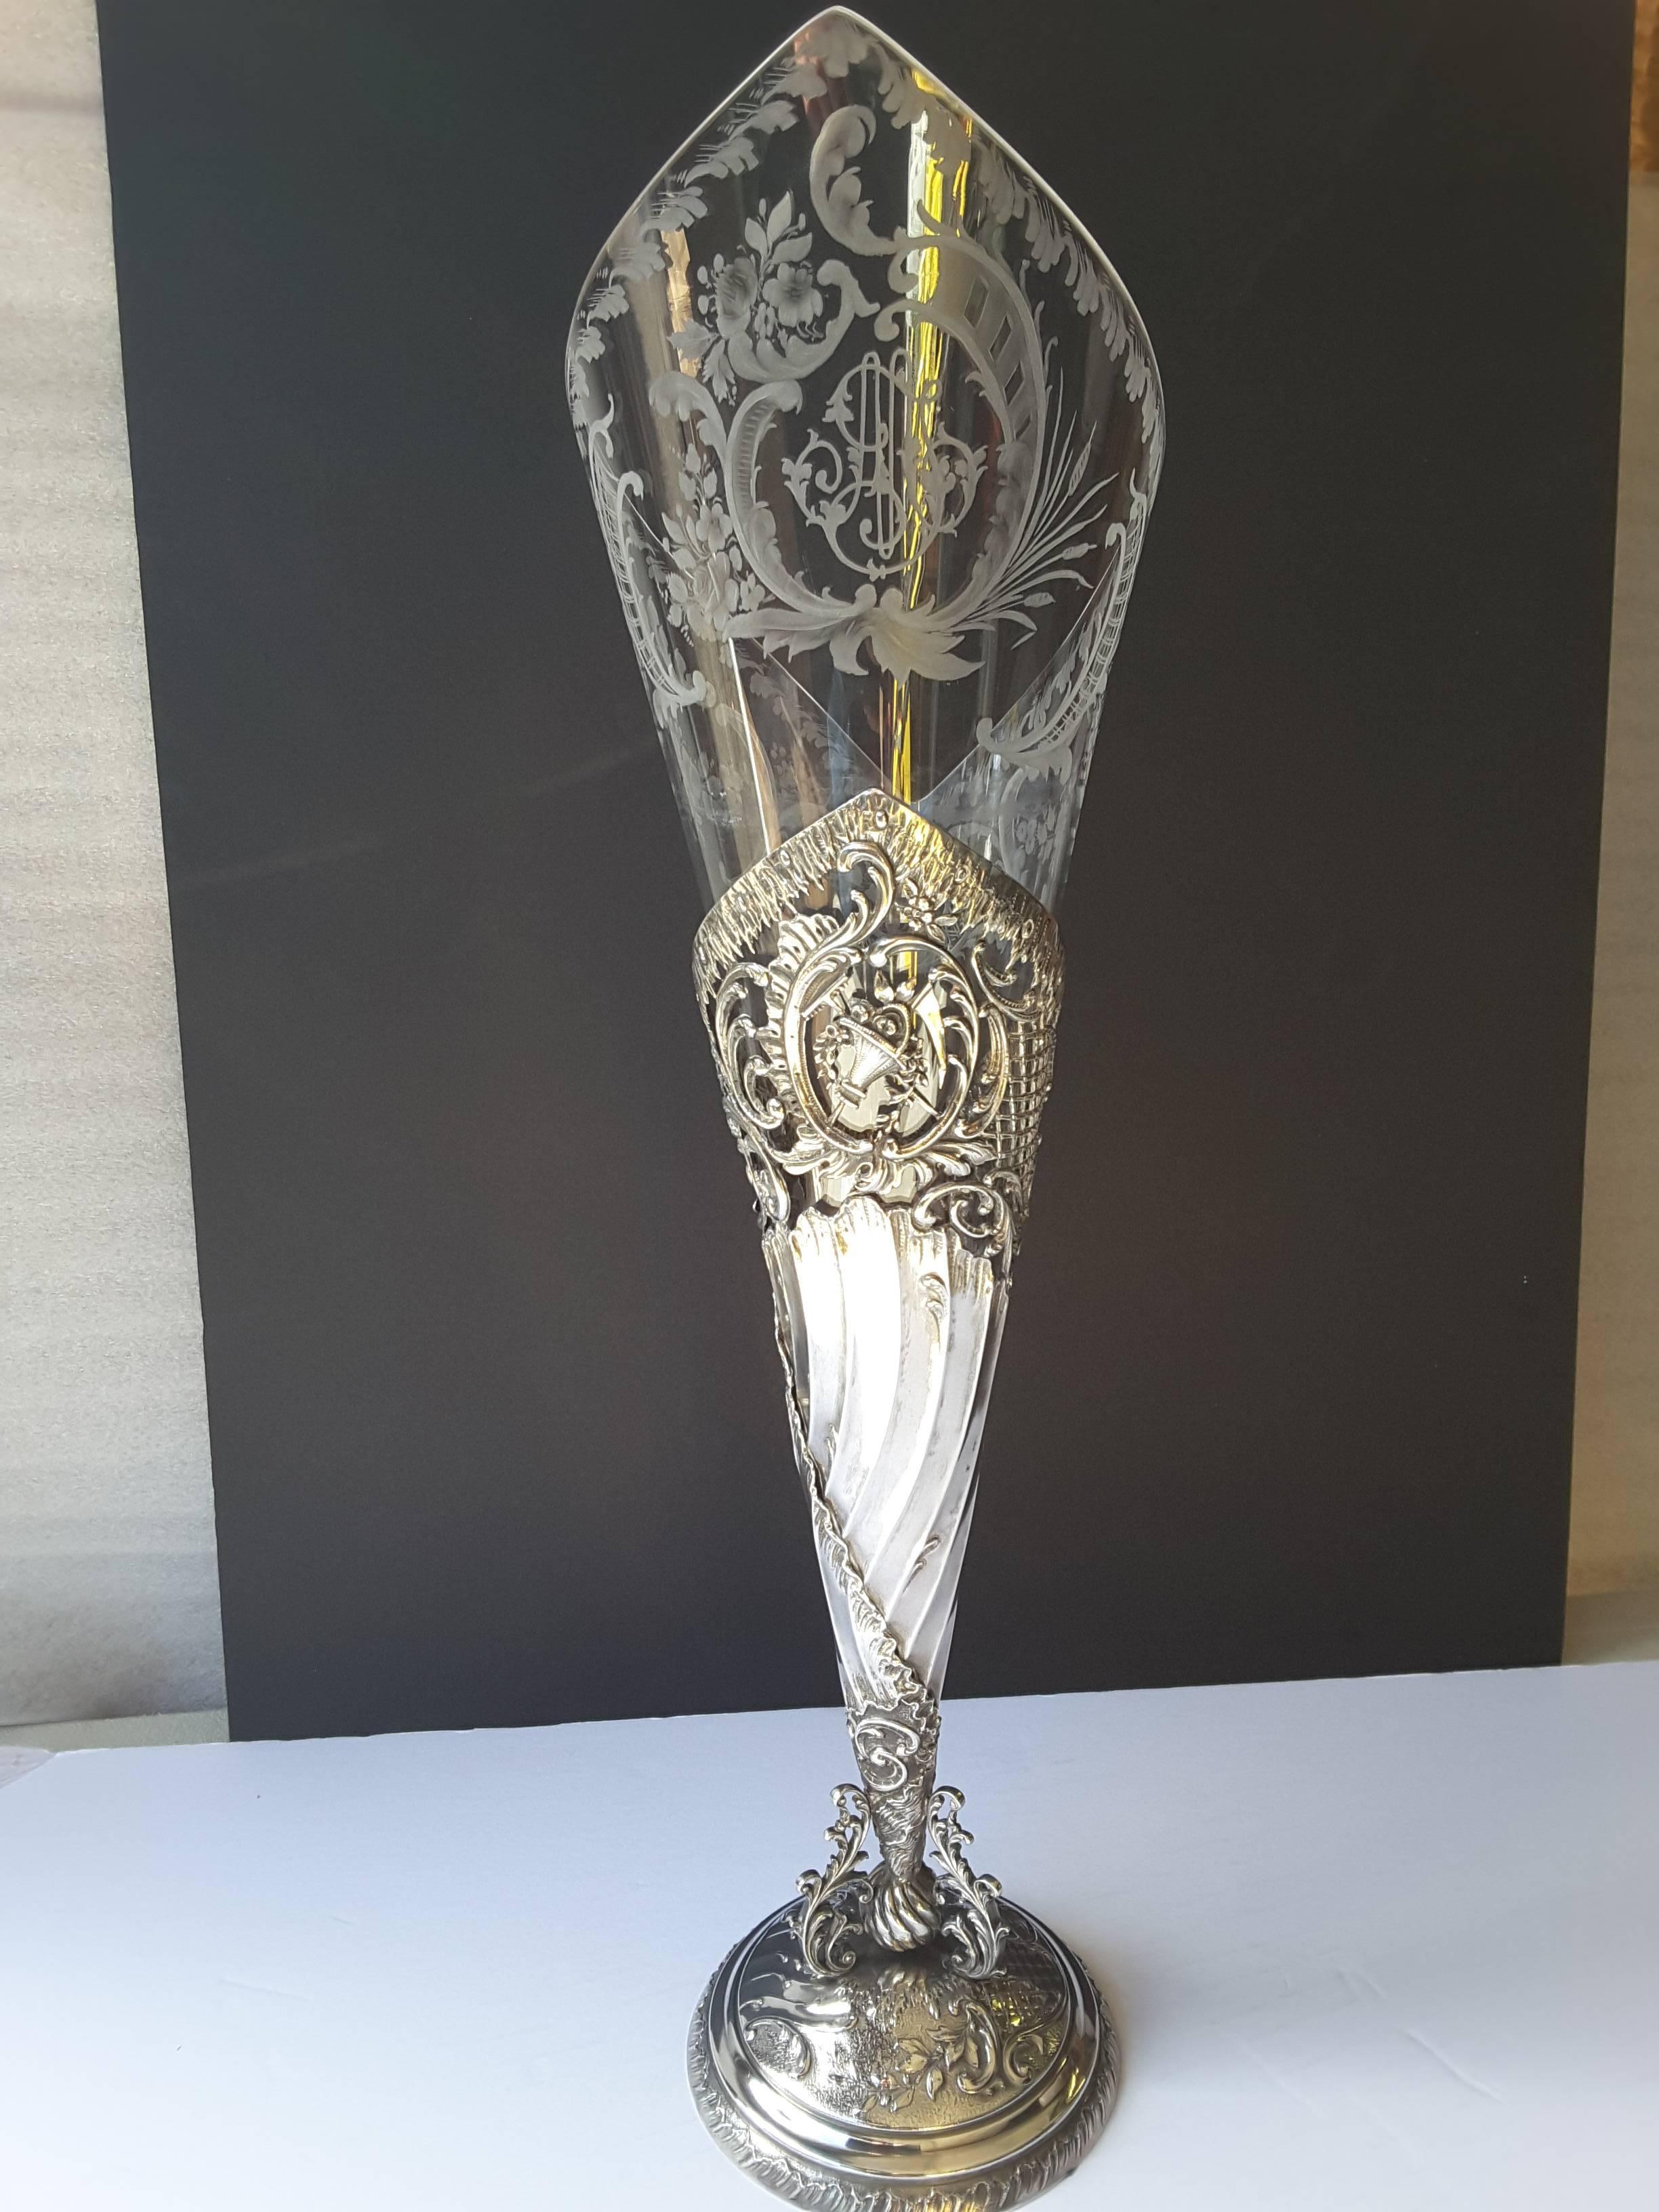 20th Century French Antique Silver Trumpet/Epergne Vase, With Glass Wheel Cut Insert